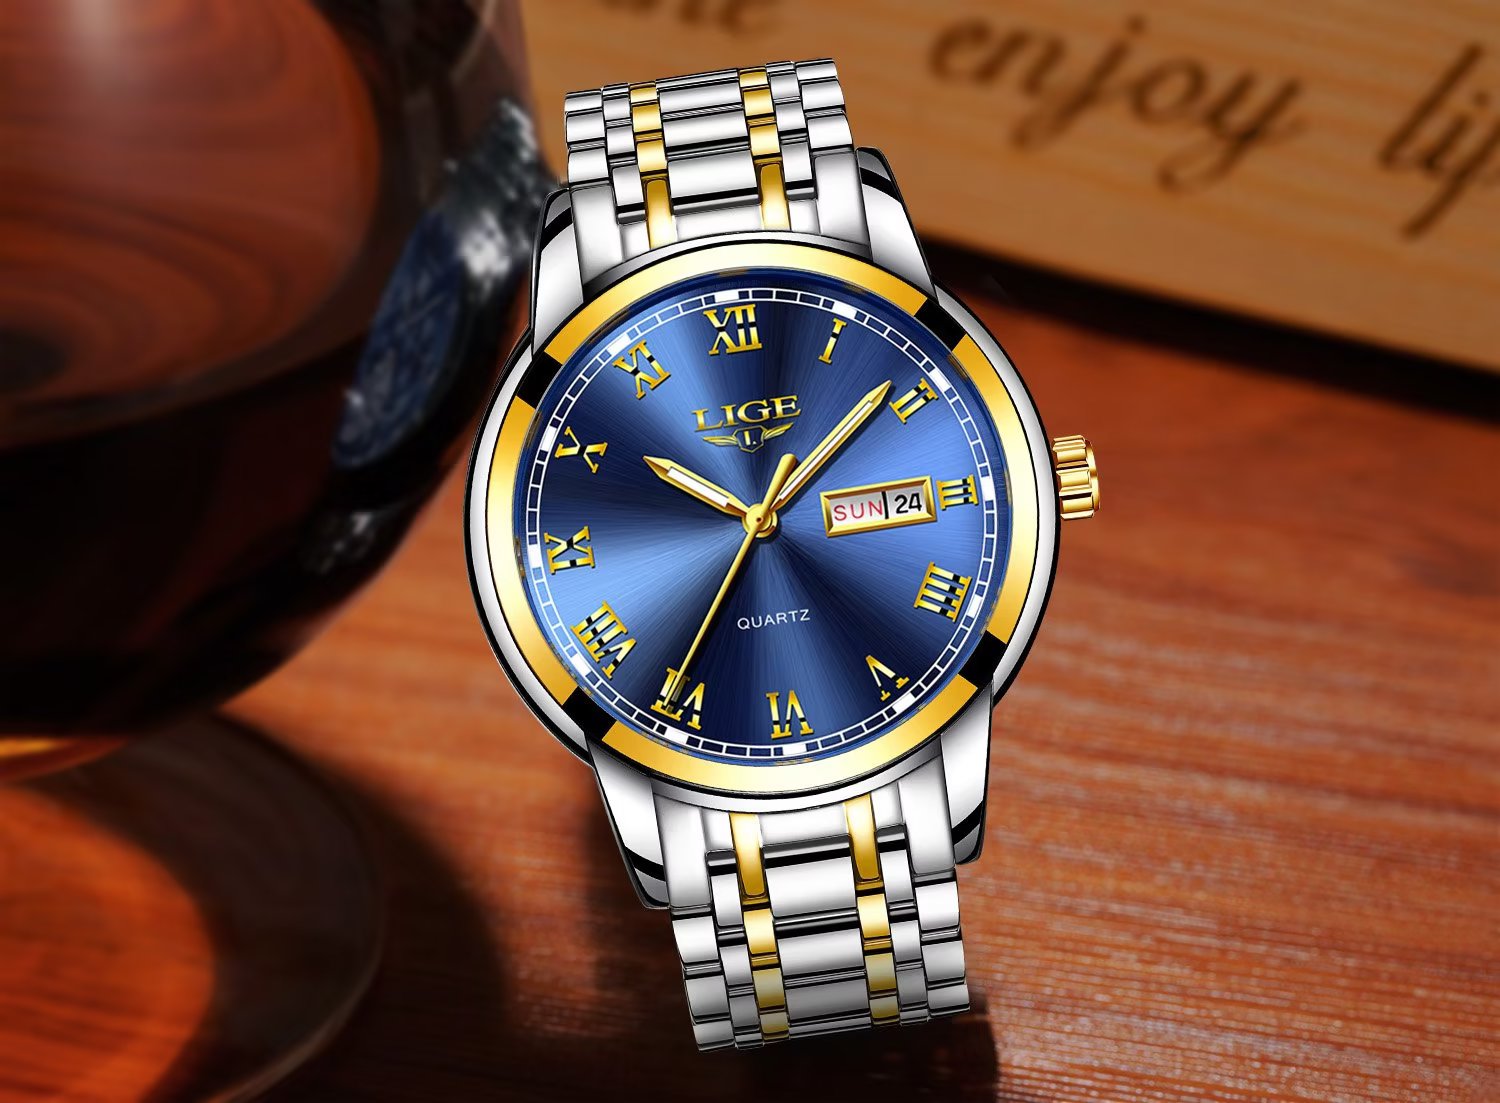 LIGE Quality Mens Watches Luxury Quartz Analog Watch Business Date Wristwatches for Women Men Silver-Gold - image 3 of 6